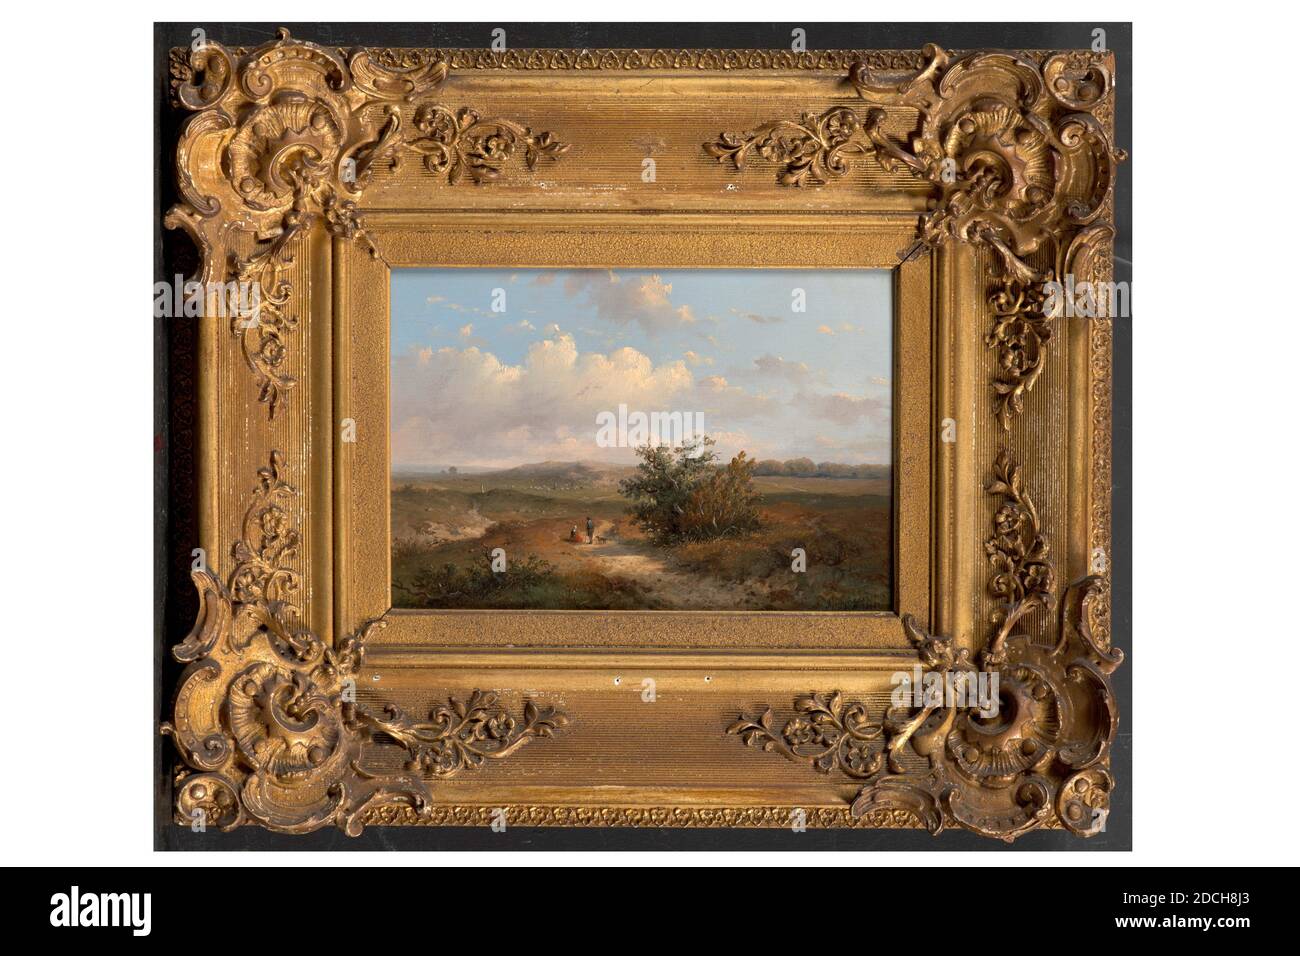 painting, Anthonie Jacobus van Wijngaerdt, 1851, Signature front, bottom right: AJ v. Wijngaerdt f 1851, panel, oil paint, painted, Carrier: 16.6 × 24 × 1cm 166 × 240 × 10mm, With frame: 36.5 × 43, 8 × 5cm 365 × 438 × 50mm, landscape, woman, dog, man, Painting depicting a hilly landscape. In the right foreground is a large shrub. To the left of the bush is a dirt road on which a woman with a red skirt sits with a standing man with a dog. The man is leaning on a walking stick. In the background is a flock of sheep. The hilly slope is hazy and contains trees. Signed bottom right. The painting is Stock Photo